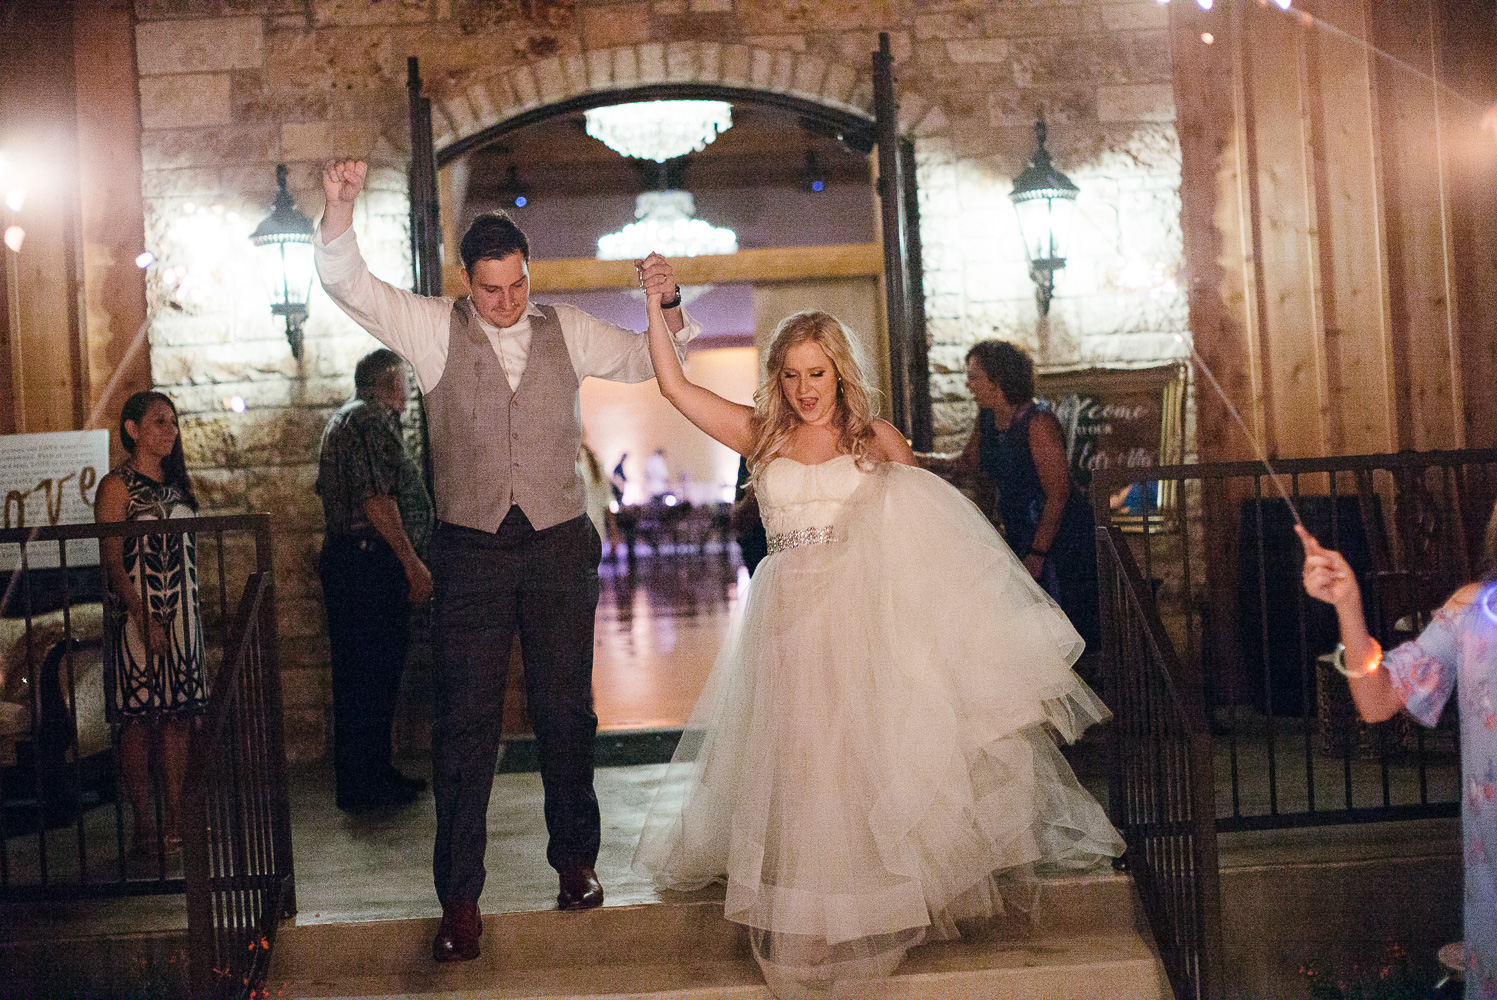 The getaway for couple as groom punches the air at Chandelier of Gruene Wedding Reception-68